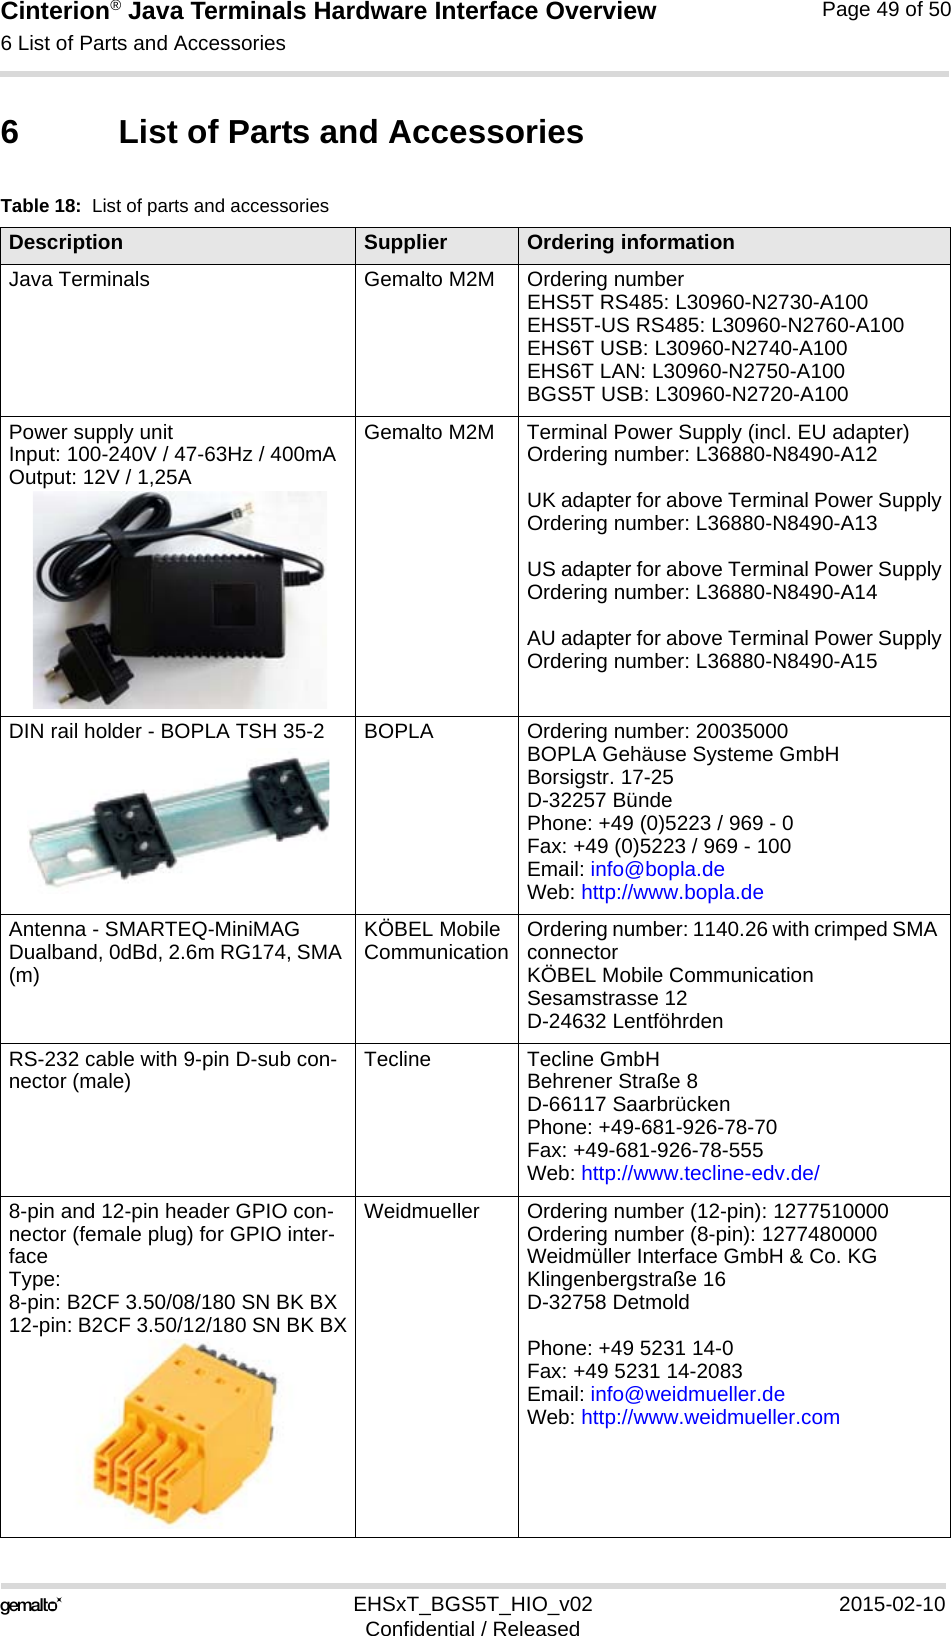 Cinterion® Java Terminals Hardware Interface Overview6 List of Parts and Accessories49EHSxT_BGS5T_HIO_v02 2015-02-10Confidential / ReleasedPage 49 of 506 List of Parts and AccessoriesTable 18:  List of parts and accessoriesDescription Supplier Ordering informationJava Terminals  Gemalto M2M Ordering numberEHS5T RS485: L30960-N2730-A100EHS5T-US RS485: L30960-N2760-A100EHS6T USB: L30960-N2740-A100EHS6T LAN: L30960-N2750-A100BGS5T USB: L30960-N2720-A100Power supply unitInput: 100-240V / 47-63Hz / 400mAOutput: 12V / 1,25AGemalto M2M Terminal Power Supply (incl. EU adapter)Ordering number: L36880-N8490-A12UK adapter for above Terminal Power SupplyOrdering number: L36880-N8490-A13US adapter for above Terminal Power SupplyOrdering number: L36880-N8490-A14AU adapter for above Terminal Power SupplyOrdering number: L36880-N8490-A15DIN rail holder - BOPLA TSH 35-2 BOPLA Ordering number: 20035000BOPLA Gehäuse Systeme GmbHBorsigstr. 17-25D-32257 BündePhone: +49 (0)5223 / 969 - 0Fax: +49 (0)5223 / 969 - 100Email: info@bopla.deWeb: http://www.bopla.deAntenna - SMARTEQ-MiniMAG Dualband, 0dBd, 2.6m RG174, SMA (m)KÖBEL Mobile Communication Ordering number: 1140.26 with crimped SMA connectorKÖBEL Mobile CommunicationSesamstrasse 12D-24632 LentföhrdenRS-232 cable with 9-pin D-sub con-nector (male) Tecline Tecline GmbHBehrener Straße 8D-66117 SaarbrückenPhone: +49-681-926-78-70Fax: +49-681-926-78-555Web: http://www.tecline-edv.de/8-pin and 12-pin header GPIO con-nector (female plug) for GPIO inter-faceType: 8-pin: B2CF 3.50/08/180 SN BK BX12-pin: B2CF 3.50/12/180 SN BK BXWeidmueller Ordering number (12-pin): 1277510000Ordering number (8-pin): 1277480000Weidmüller Interface GmbH &amp; Co. KGKlingenbergstraße 16D-32758 DetmoldPhone: +49 5231 14-0Fax: +49 5231 14-2083 Email: info@weidmueller.deWeb: http://www.weidmueller.com